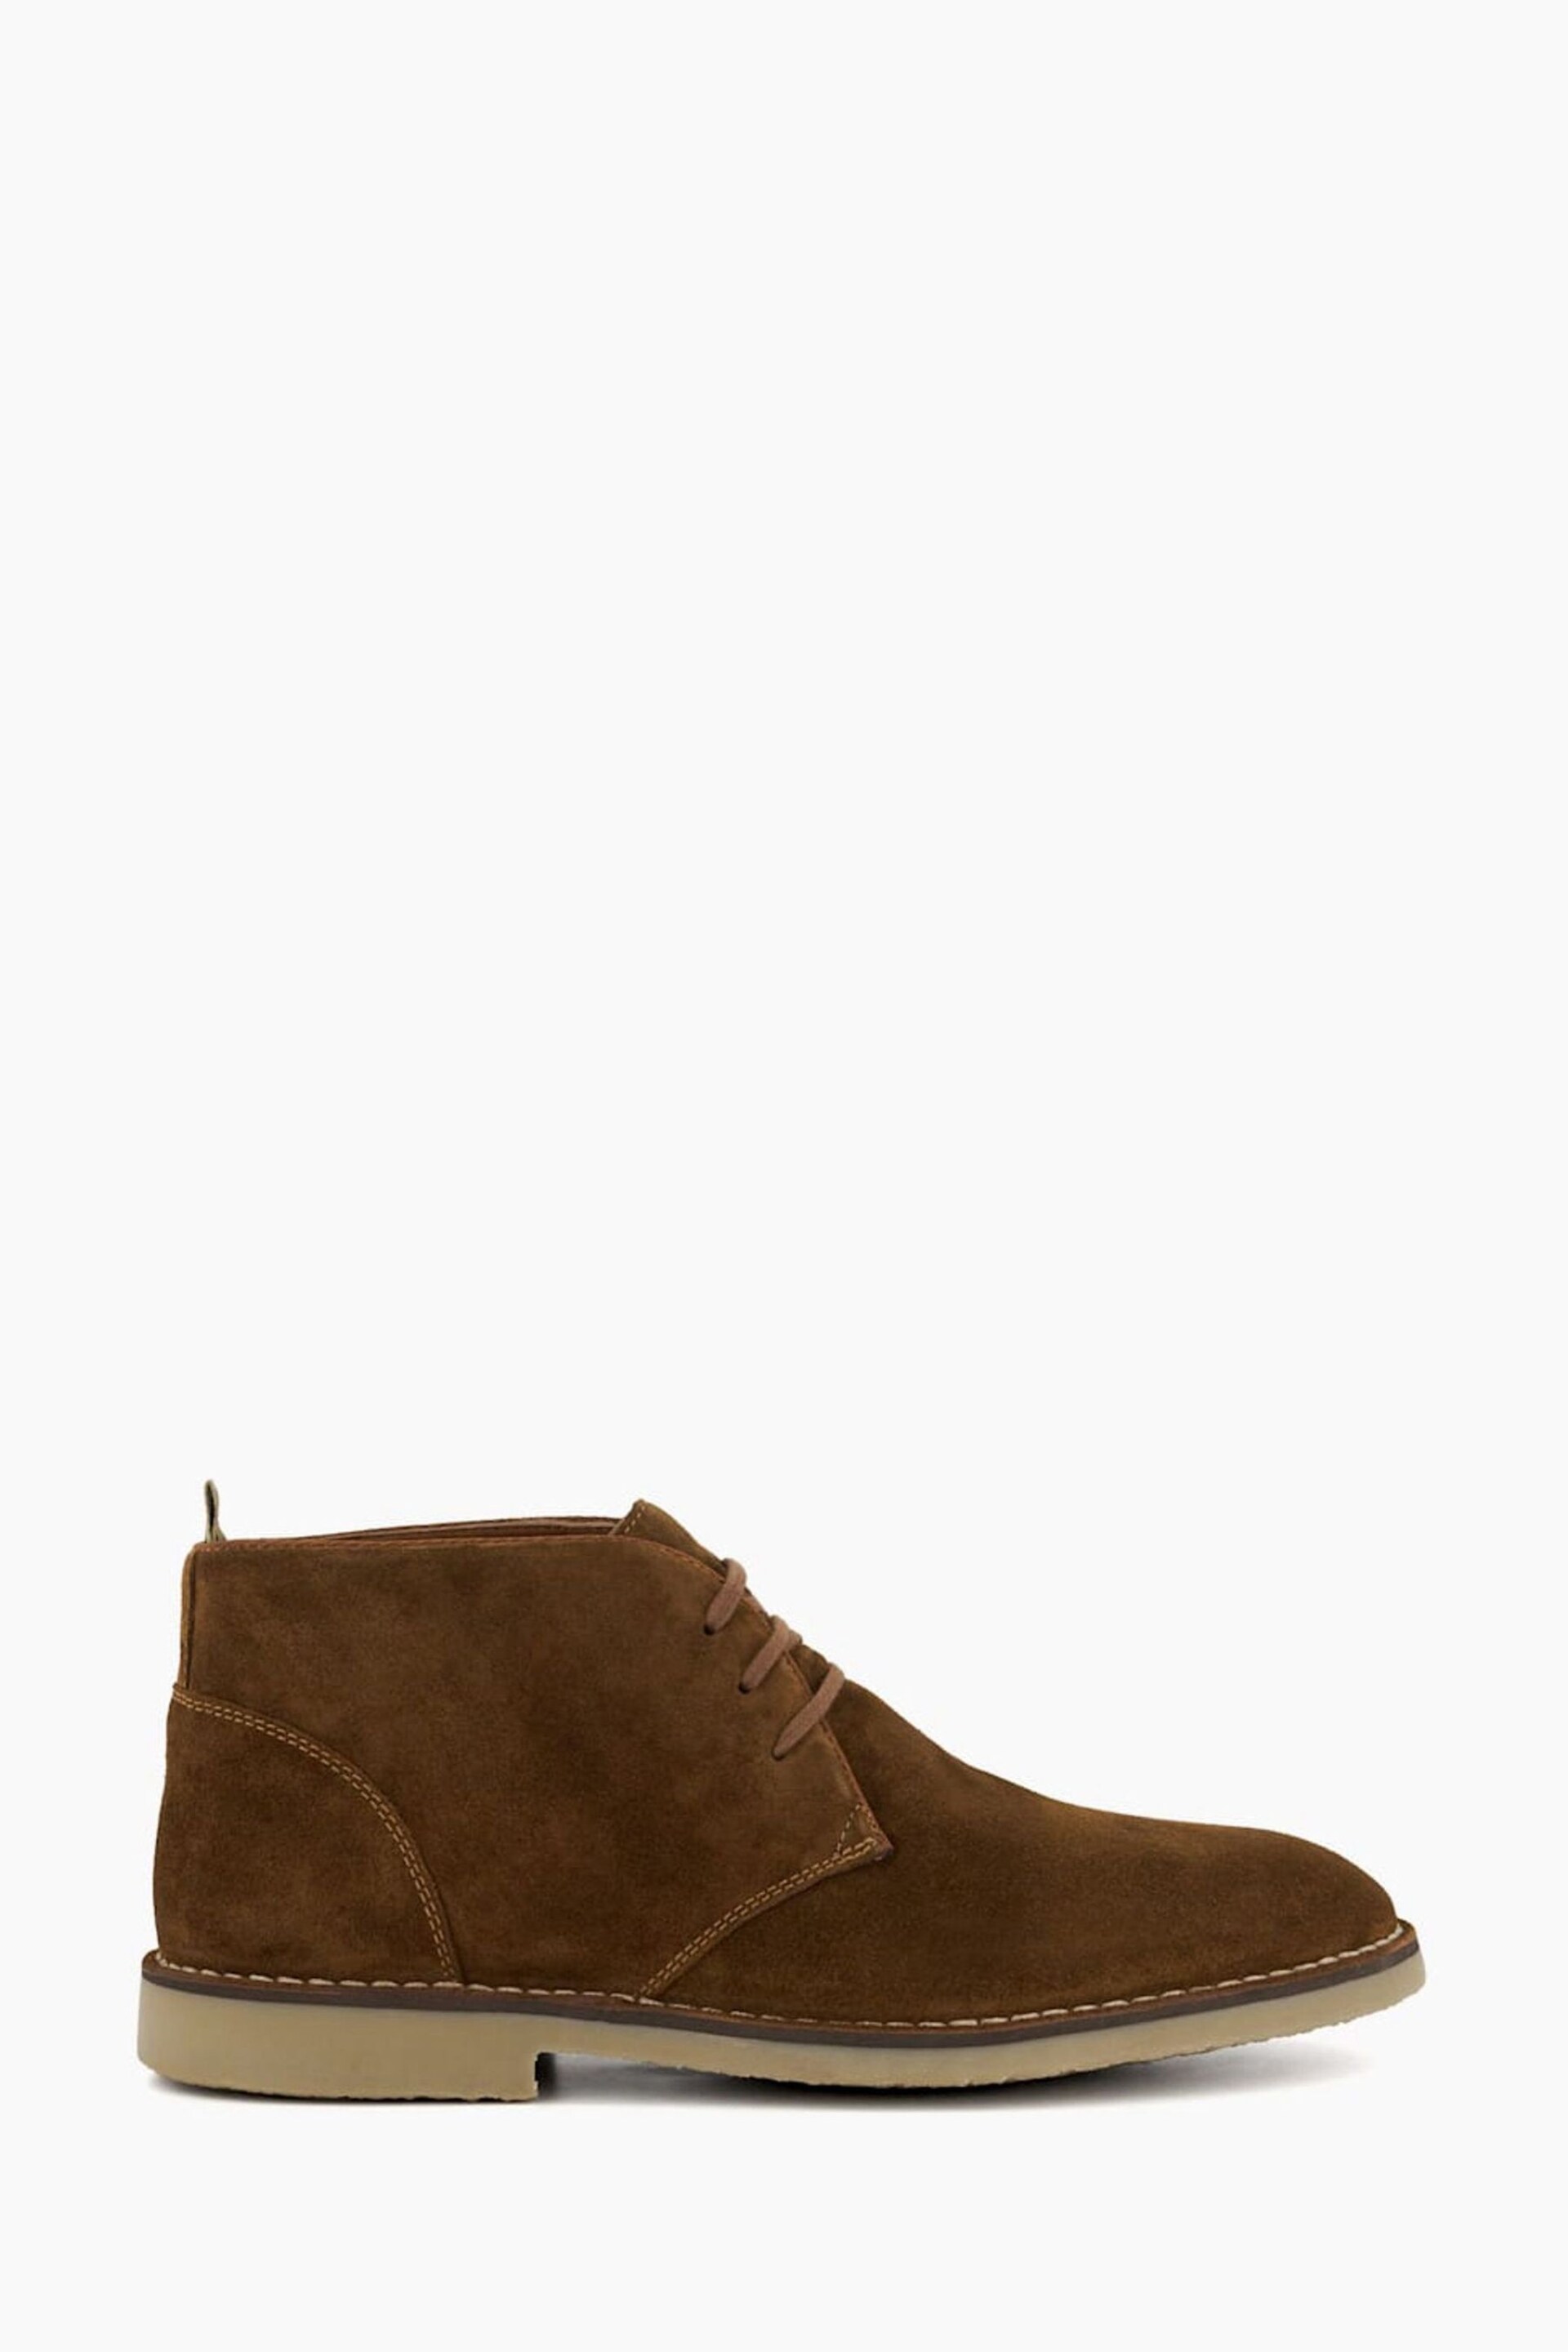 Dune London Brown Cashed Chukka Boots - Image 3 of 6